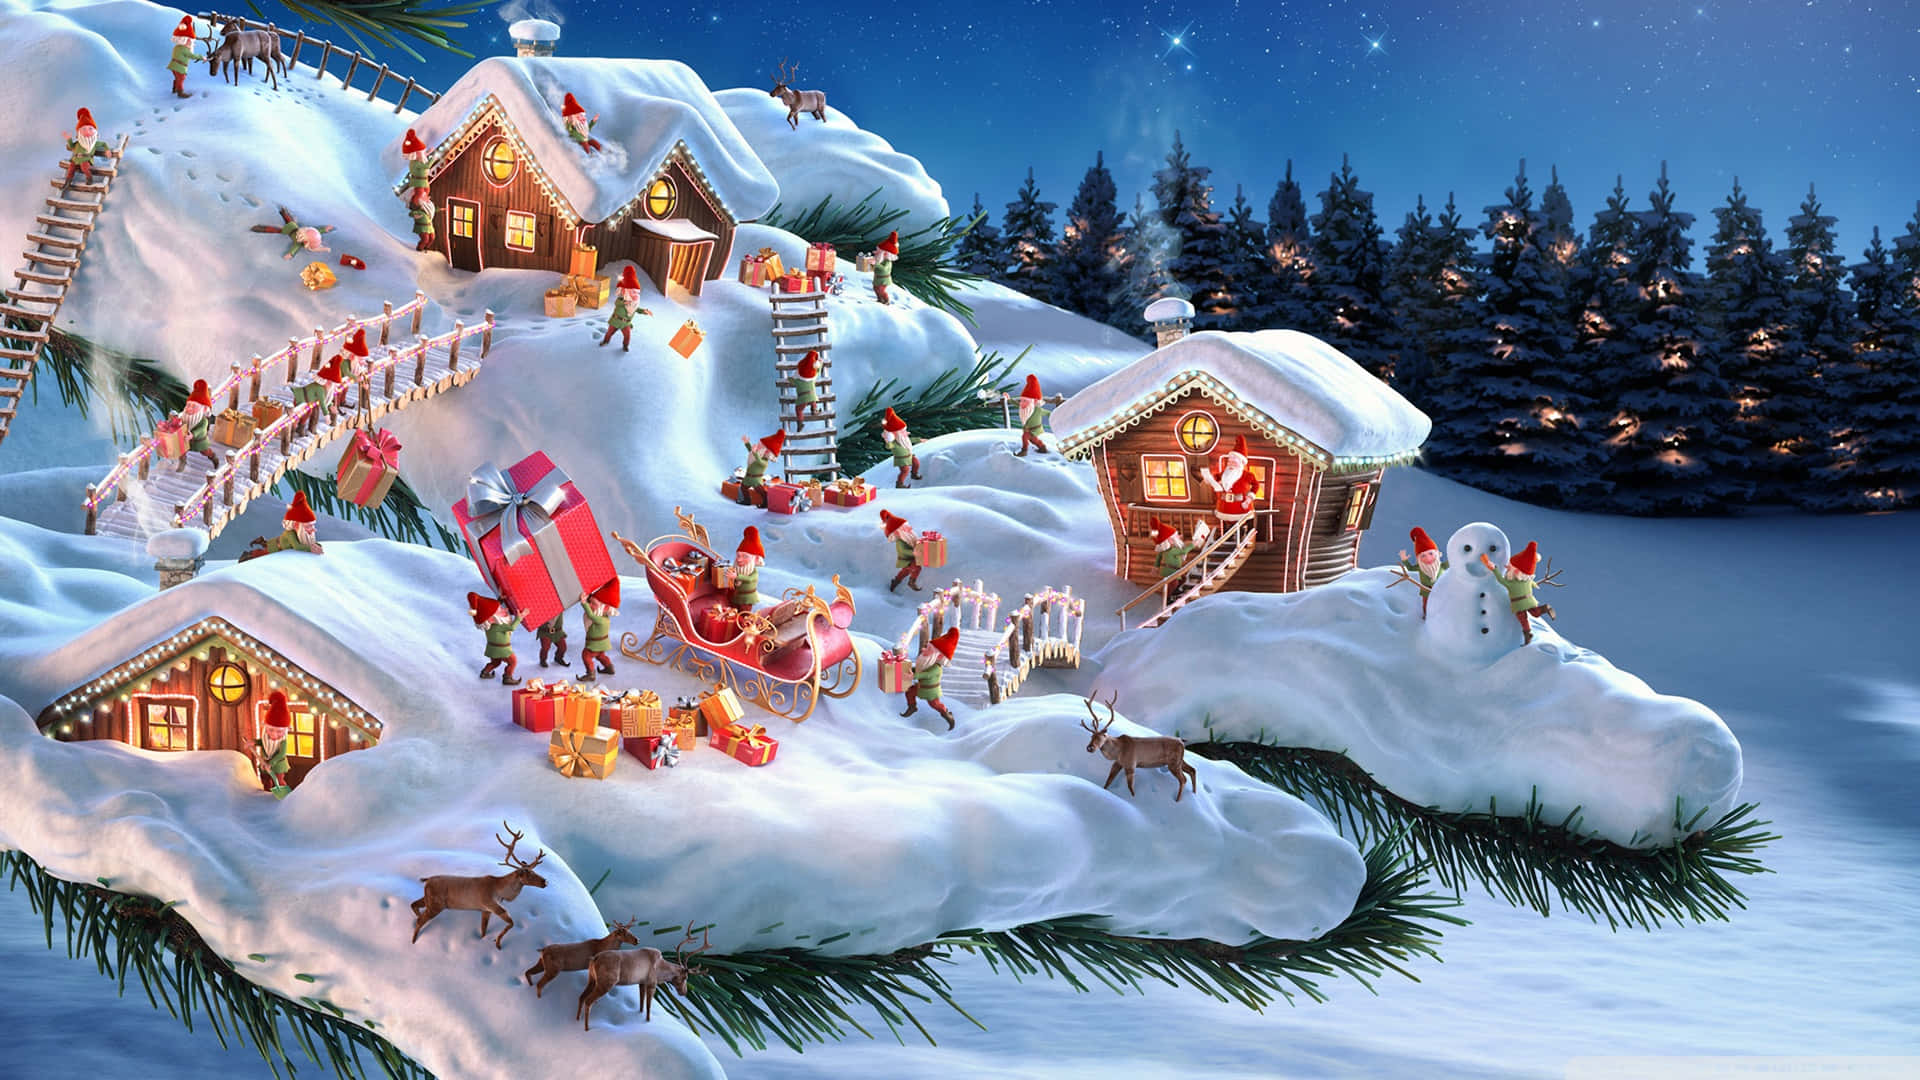 "Welcome to Christmas Village - a magical place to experience the joy of the holiday season!" Wallpaper